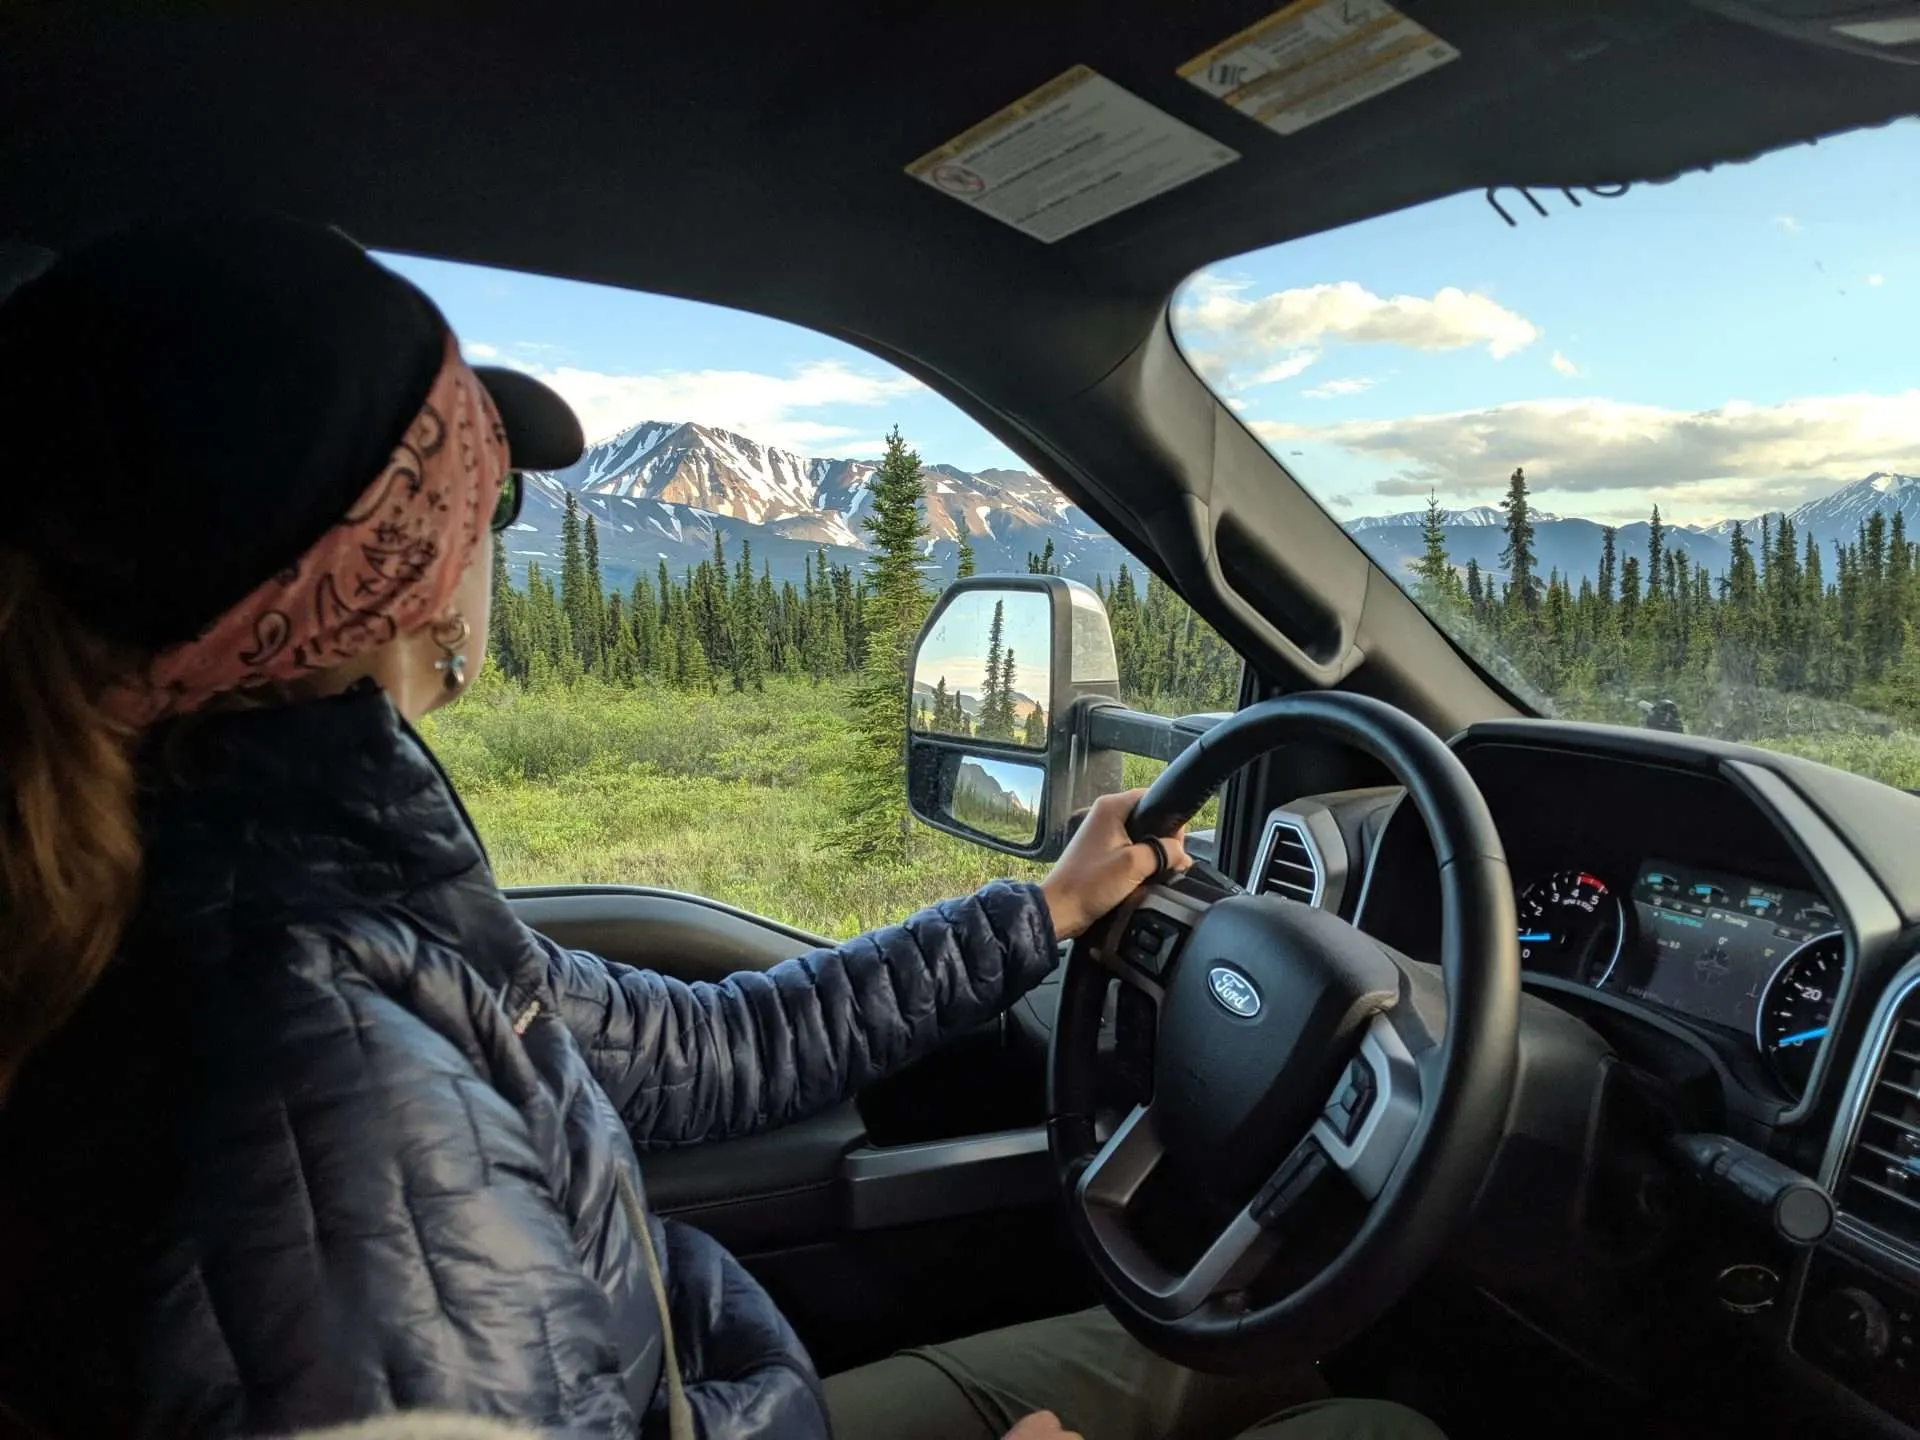 Caitlin from Mortons on the Move driving through stunning Alaskan scenary.